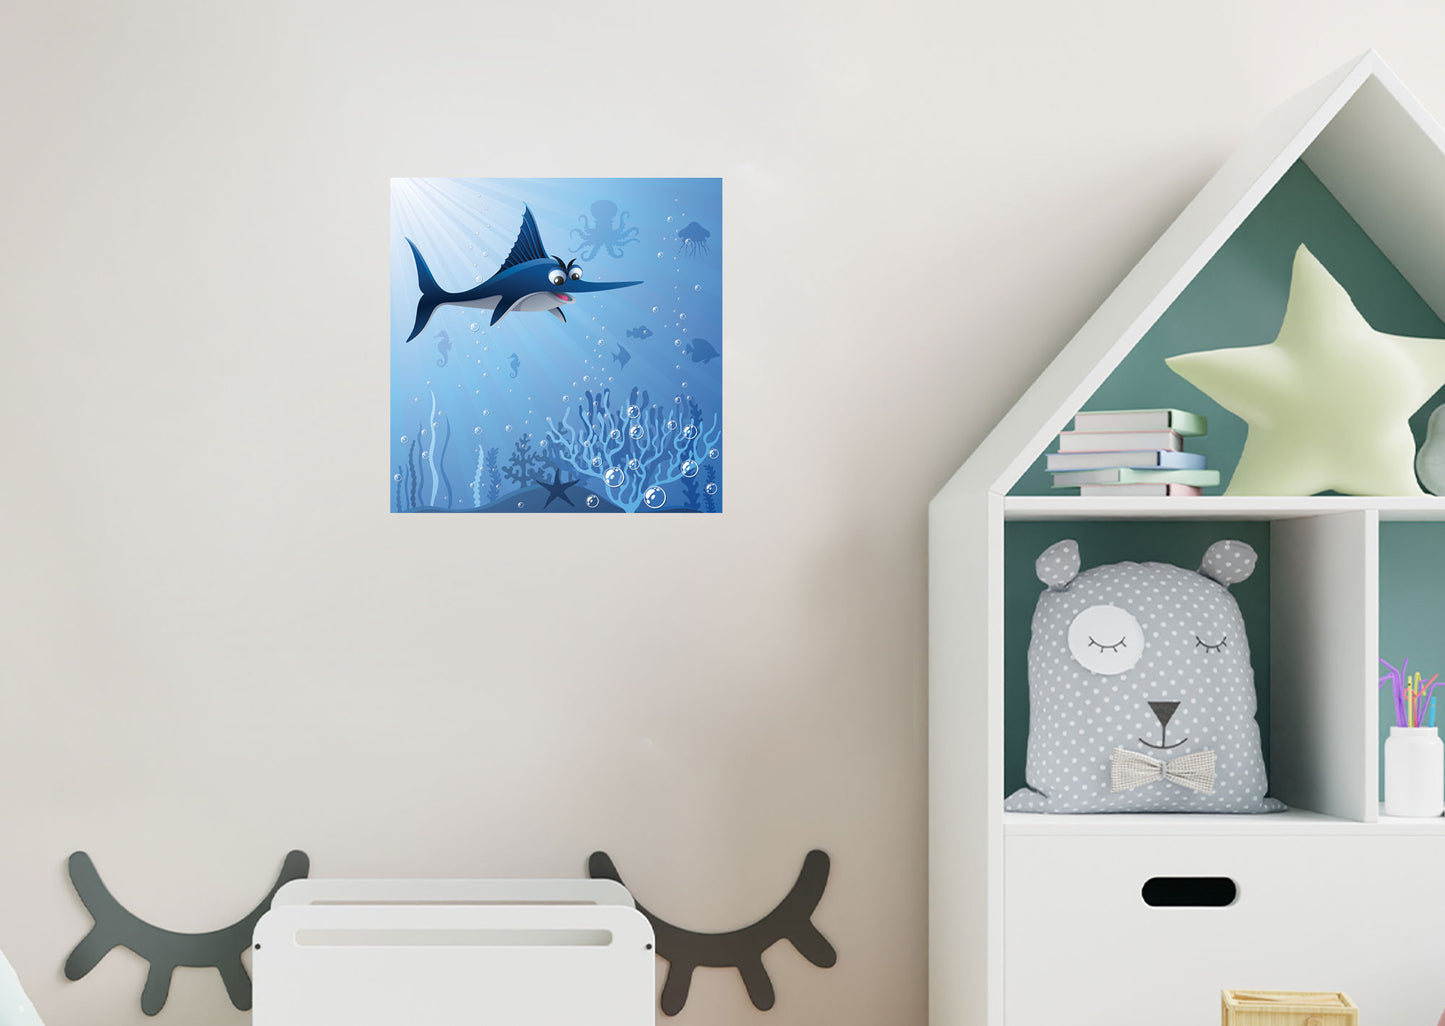 Nursery:  Blue Fish Mural        -   Removable Wall   Adhesive Decal